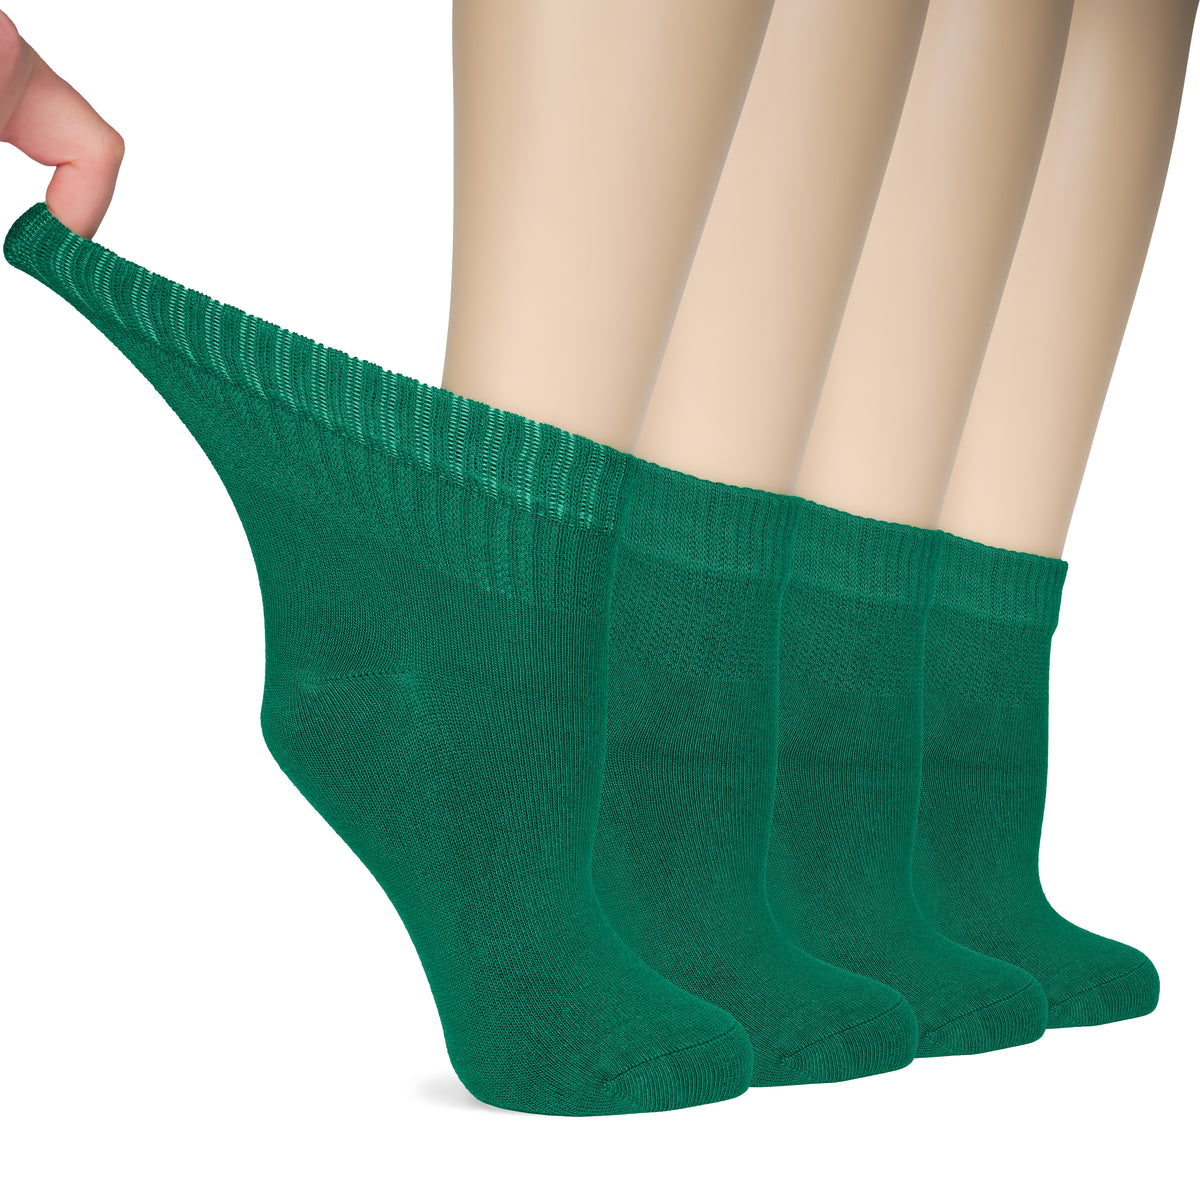 Step up your sock game with these christmas green bamboo socks. Soft, breathable, and designed for good health, they'll keep your feet happy all day long. Plus, they're stylish too!- Hugh Ugoli